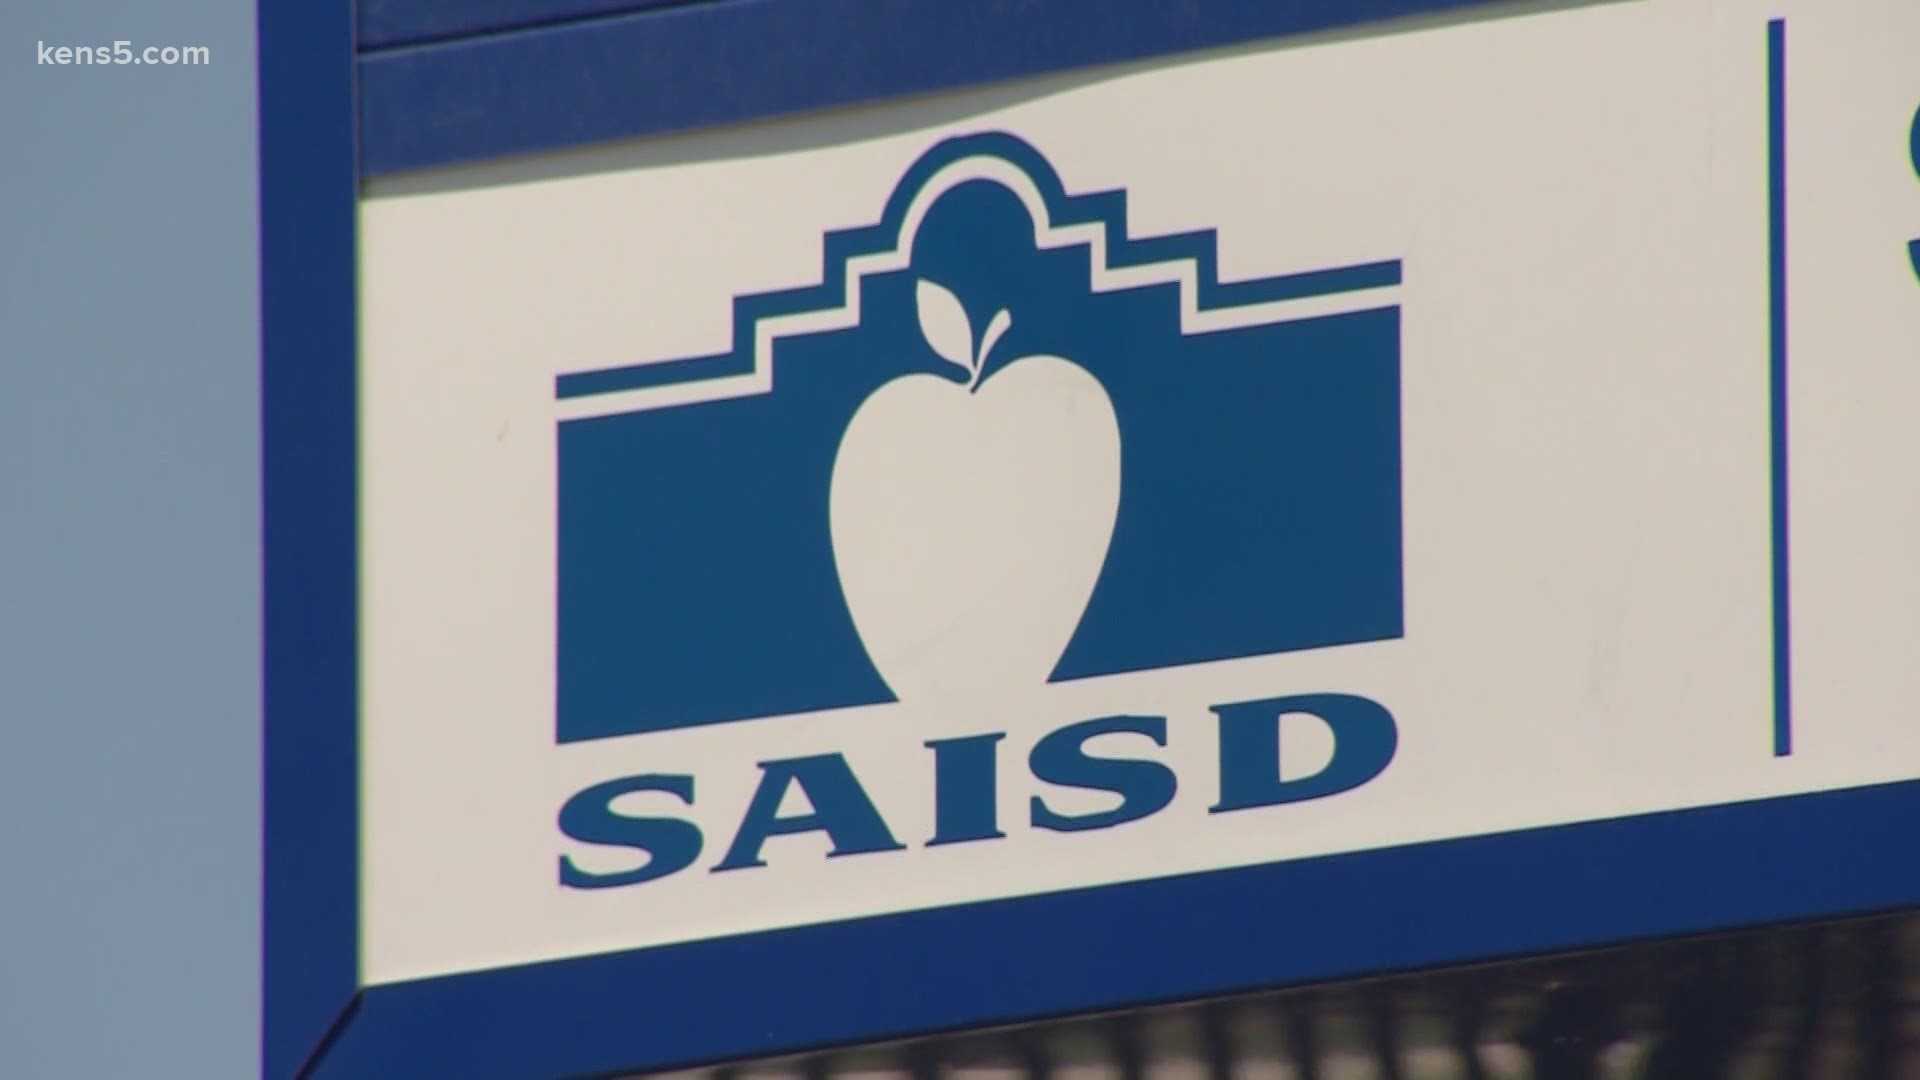 San Antonio ISD's bond propositions total $1.3 billion and will go toward renovating campuses and providing technology upgrades.